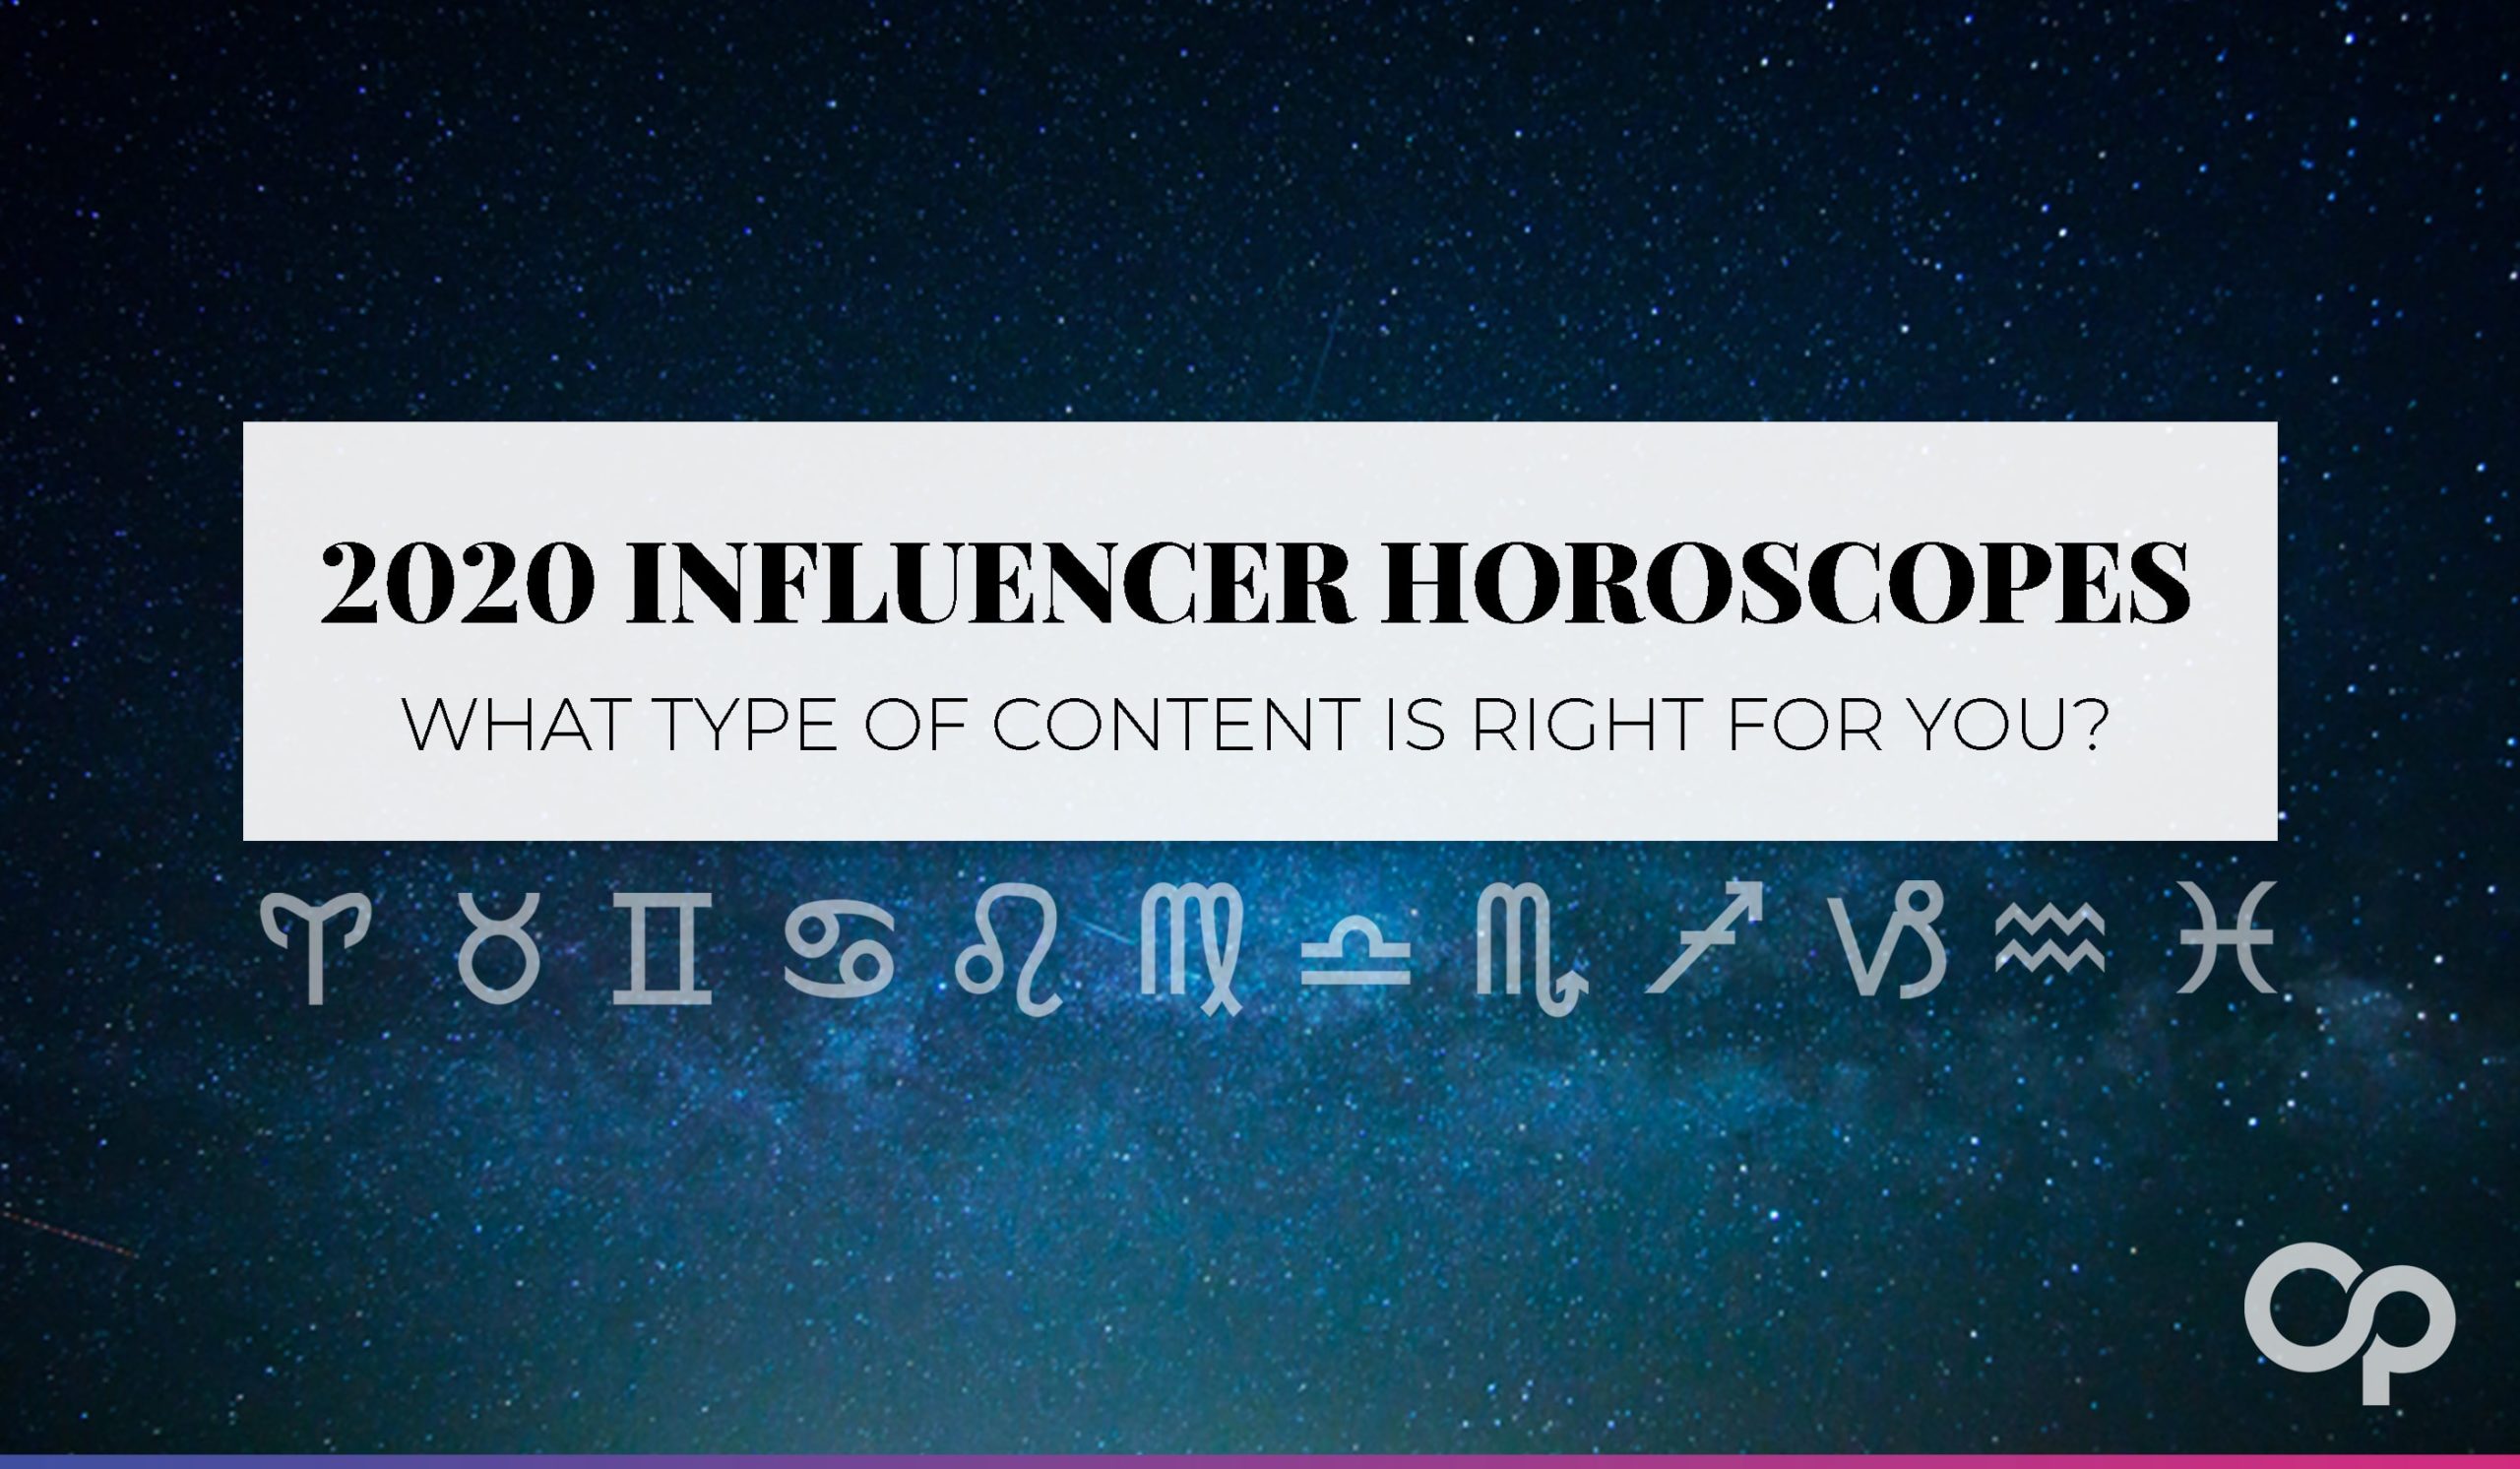 Influencer Horoscopes for 2020! What content should YOU make?